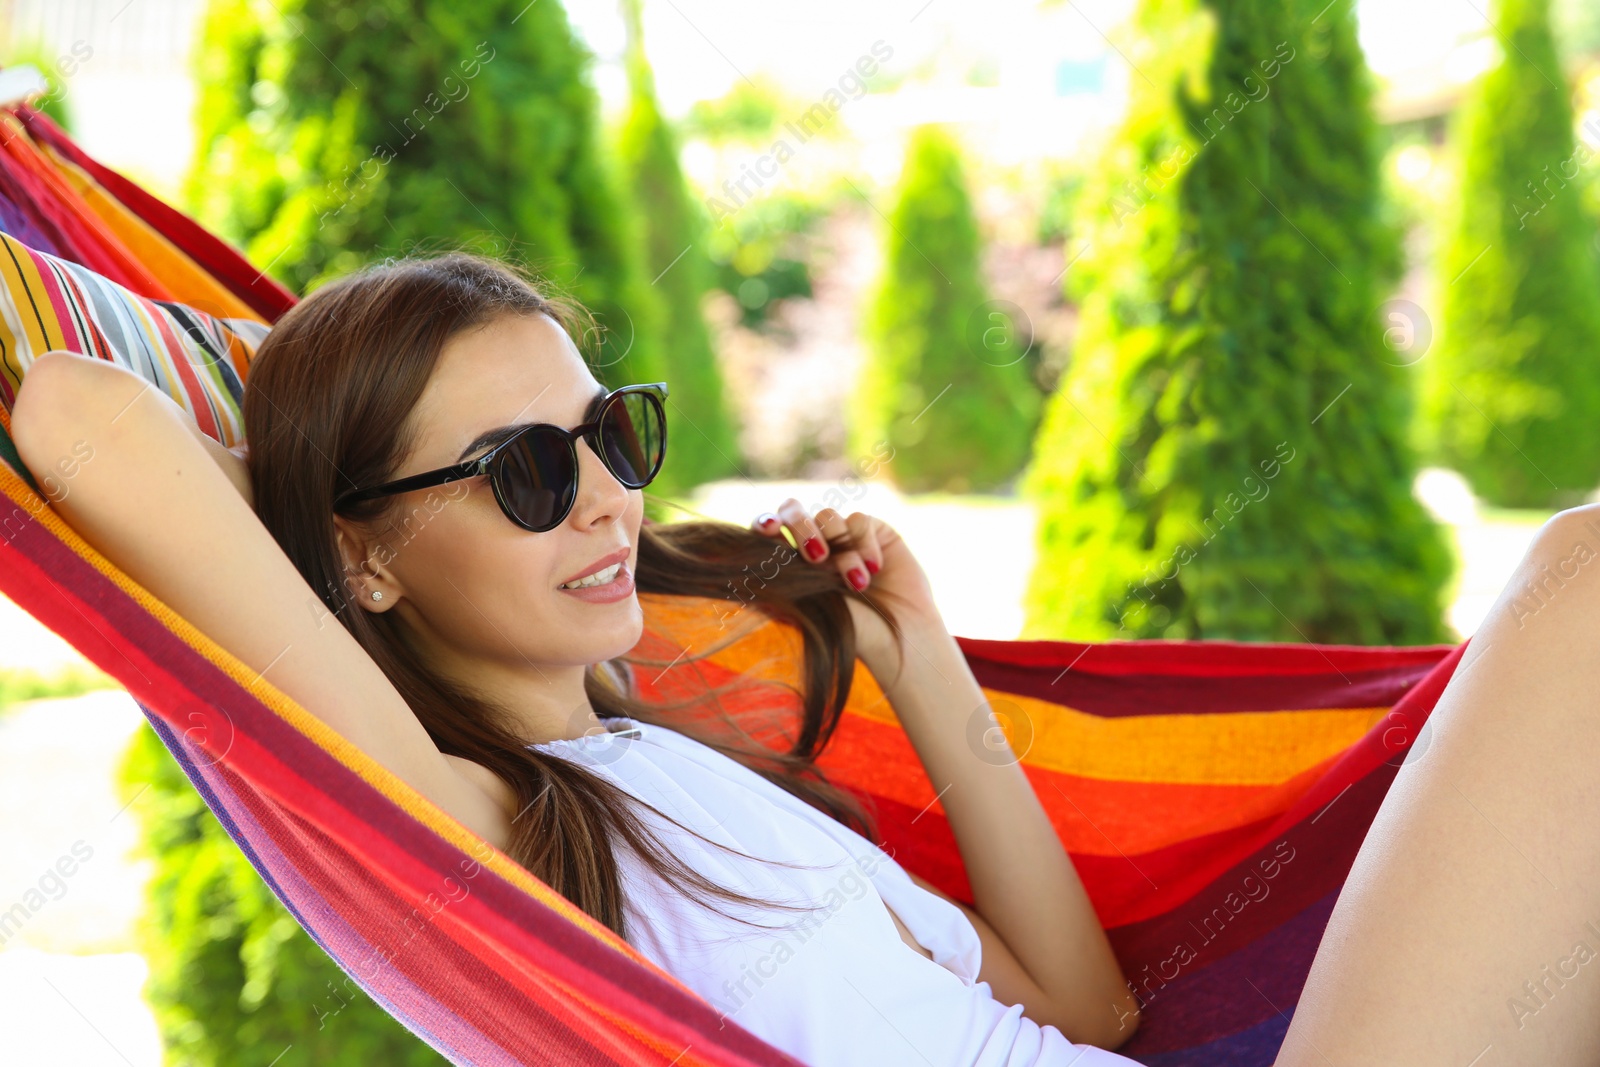 Photo of Young woman relaxing in hammock outdoors on warm summer day